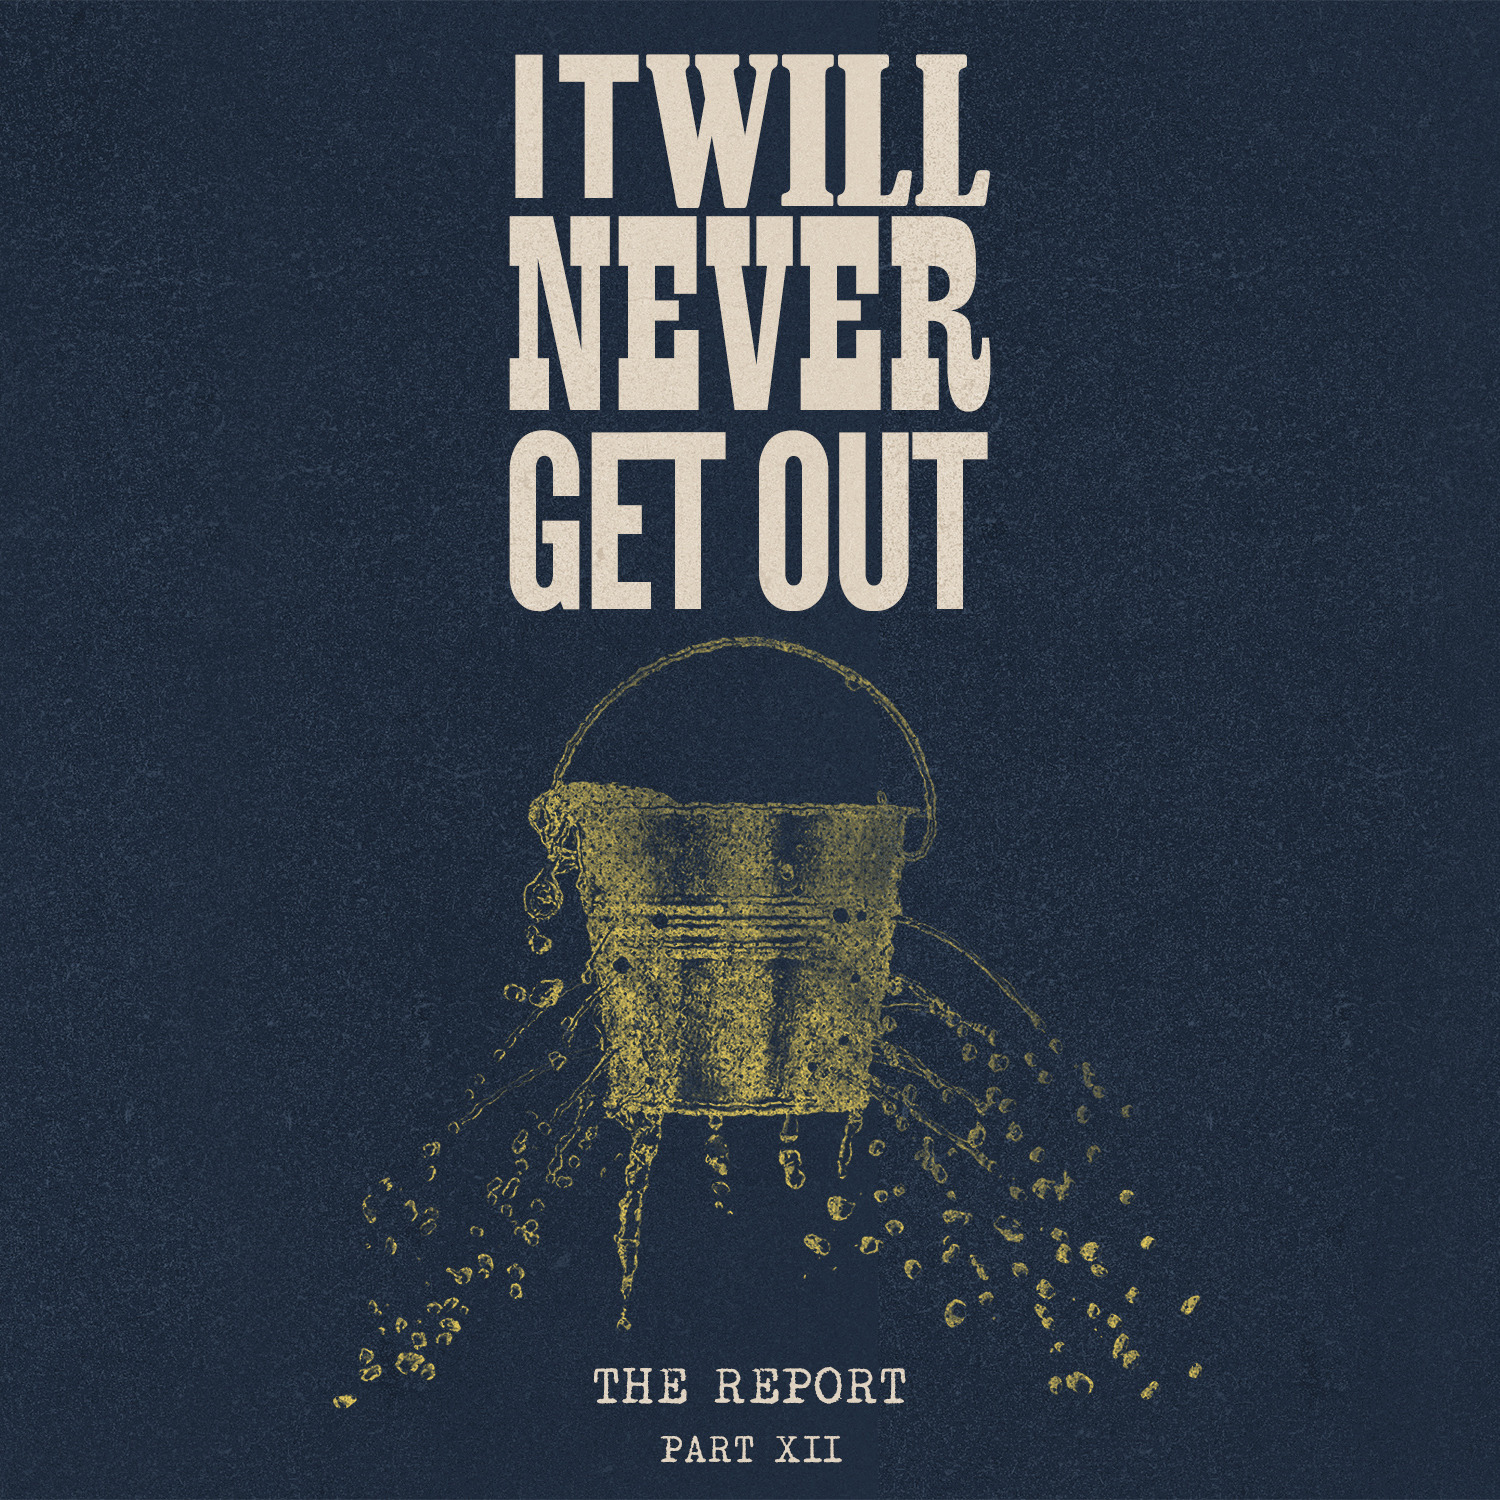 The Report Part XII: It Will Never Get Out